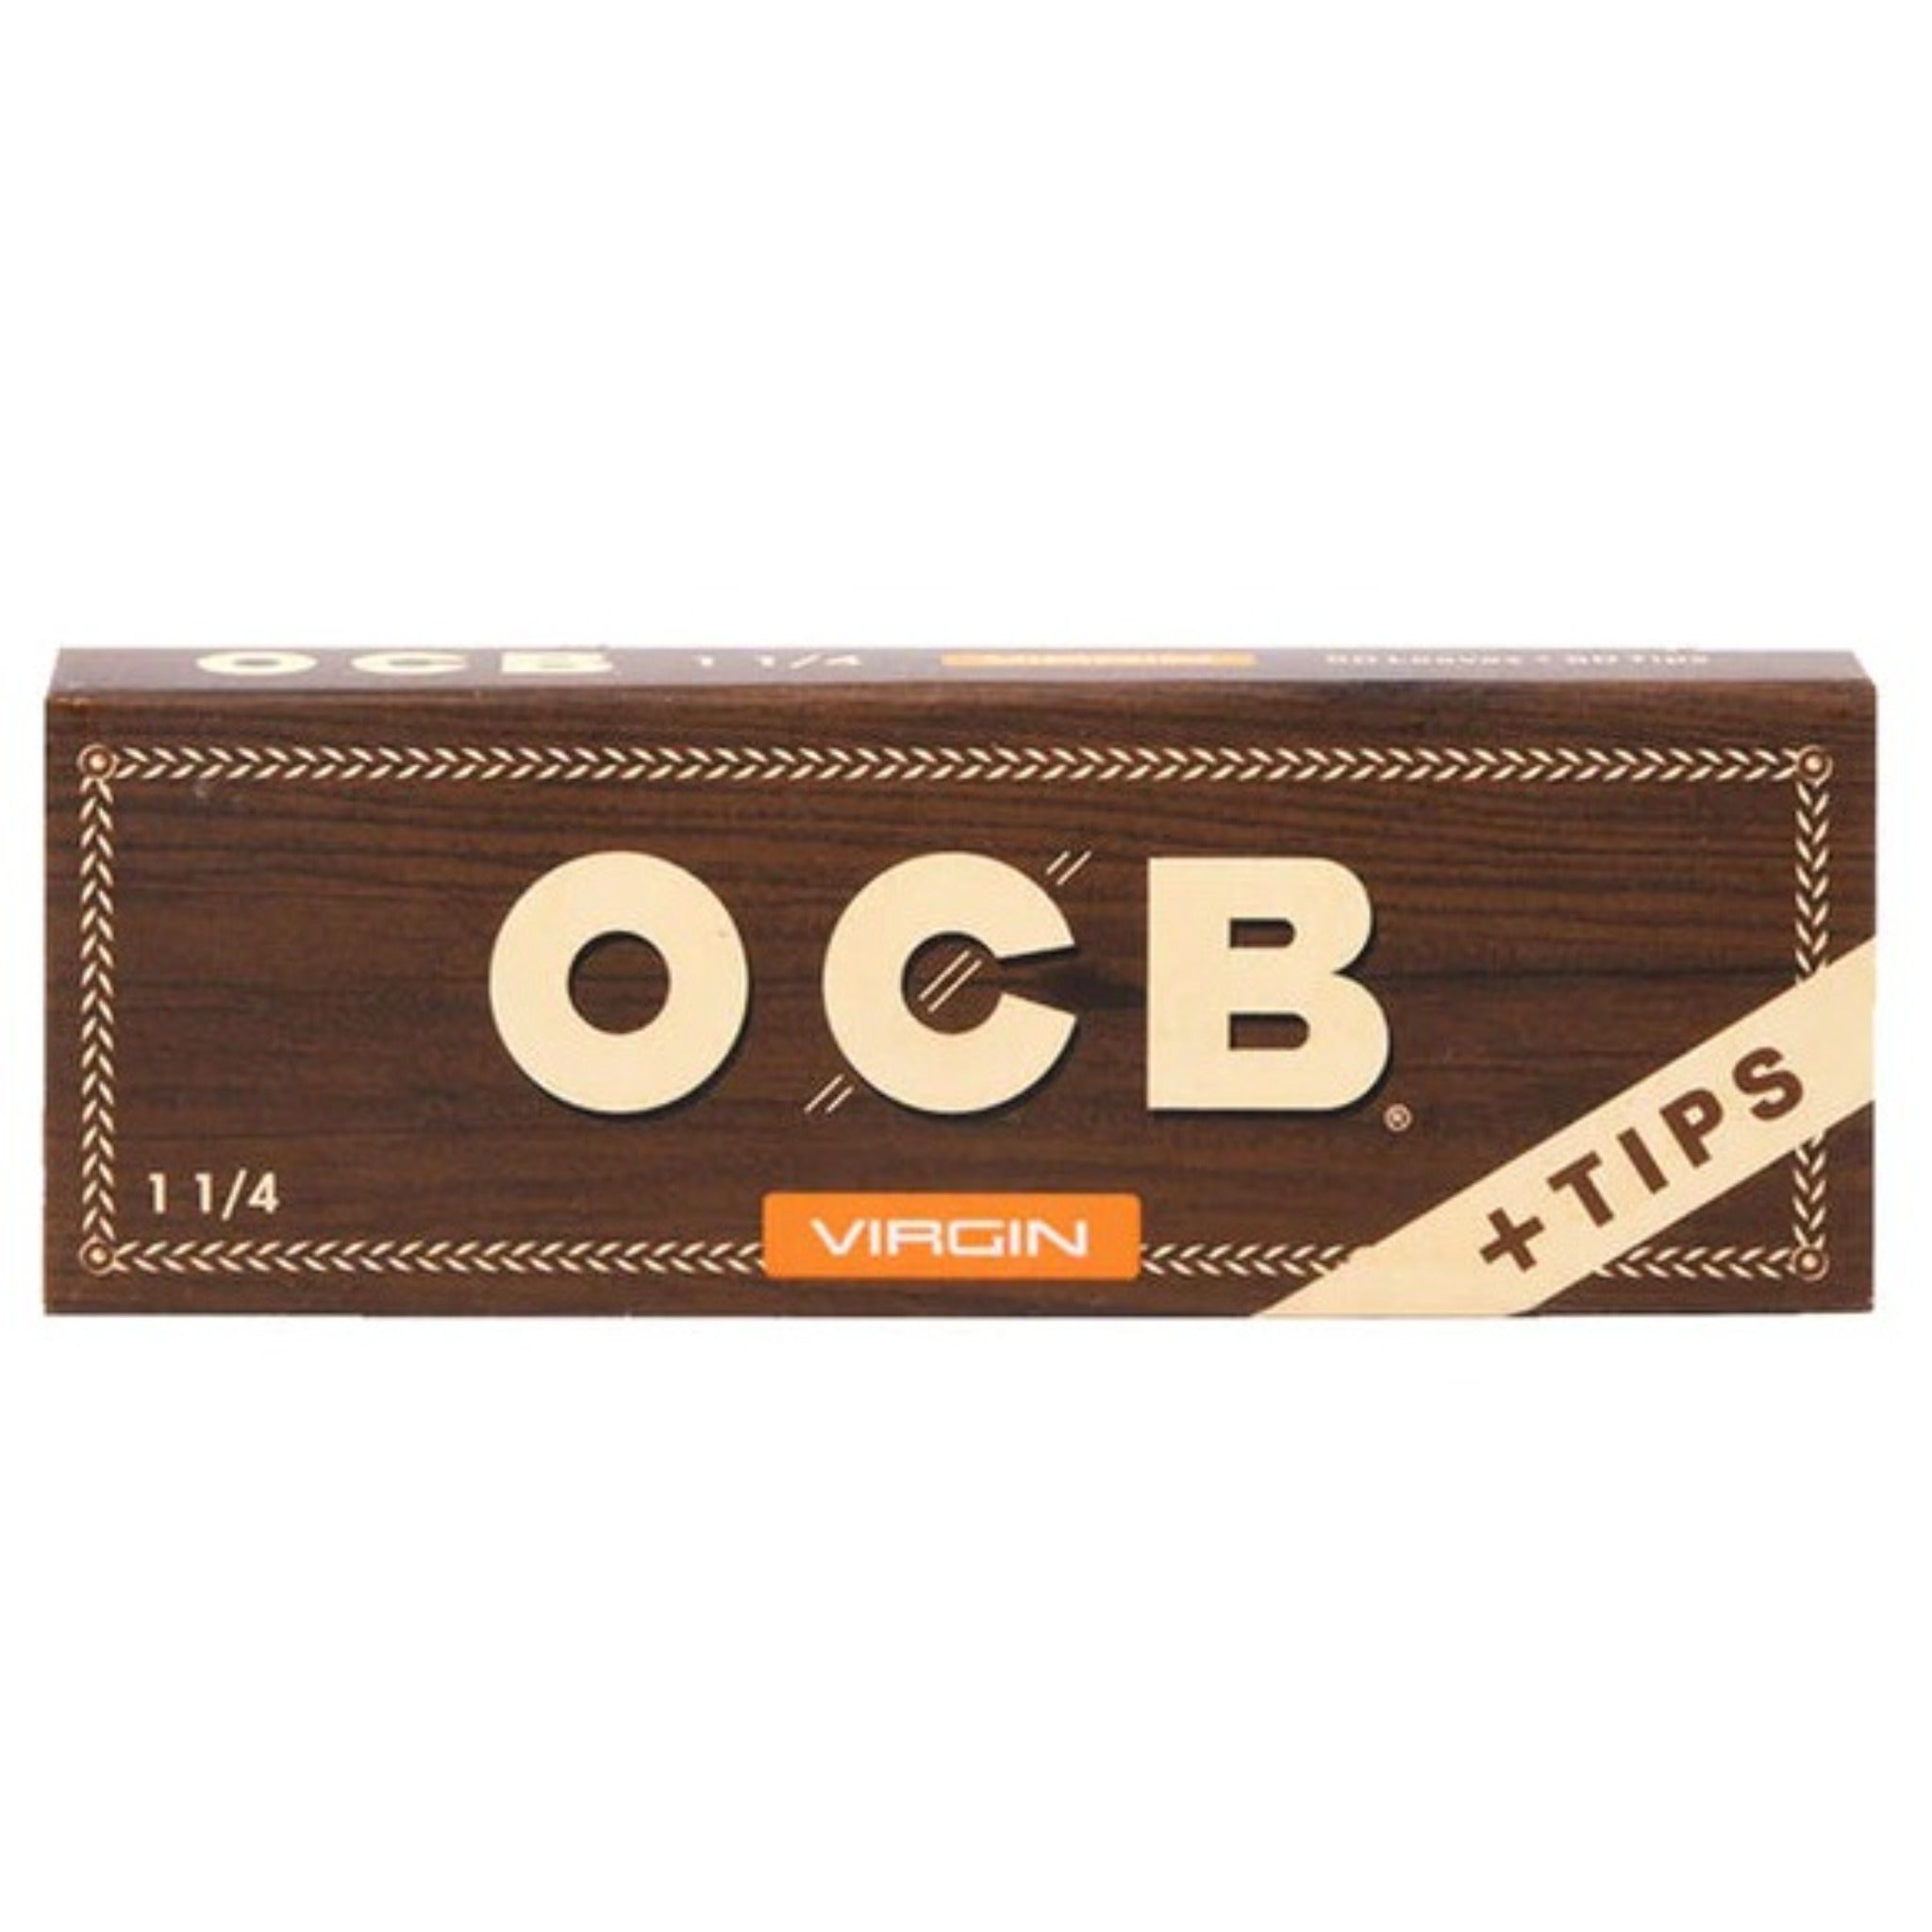 OCB Original Roling Papers + Tips Rolling Papers OCB Unbleached Virgin 1 1/4 